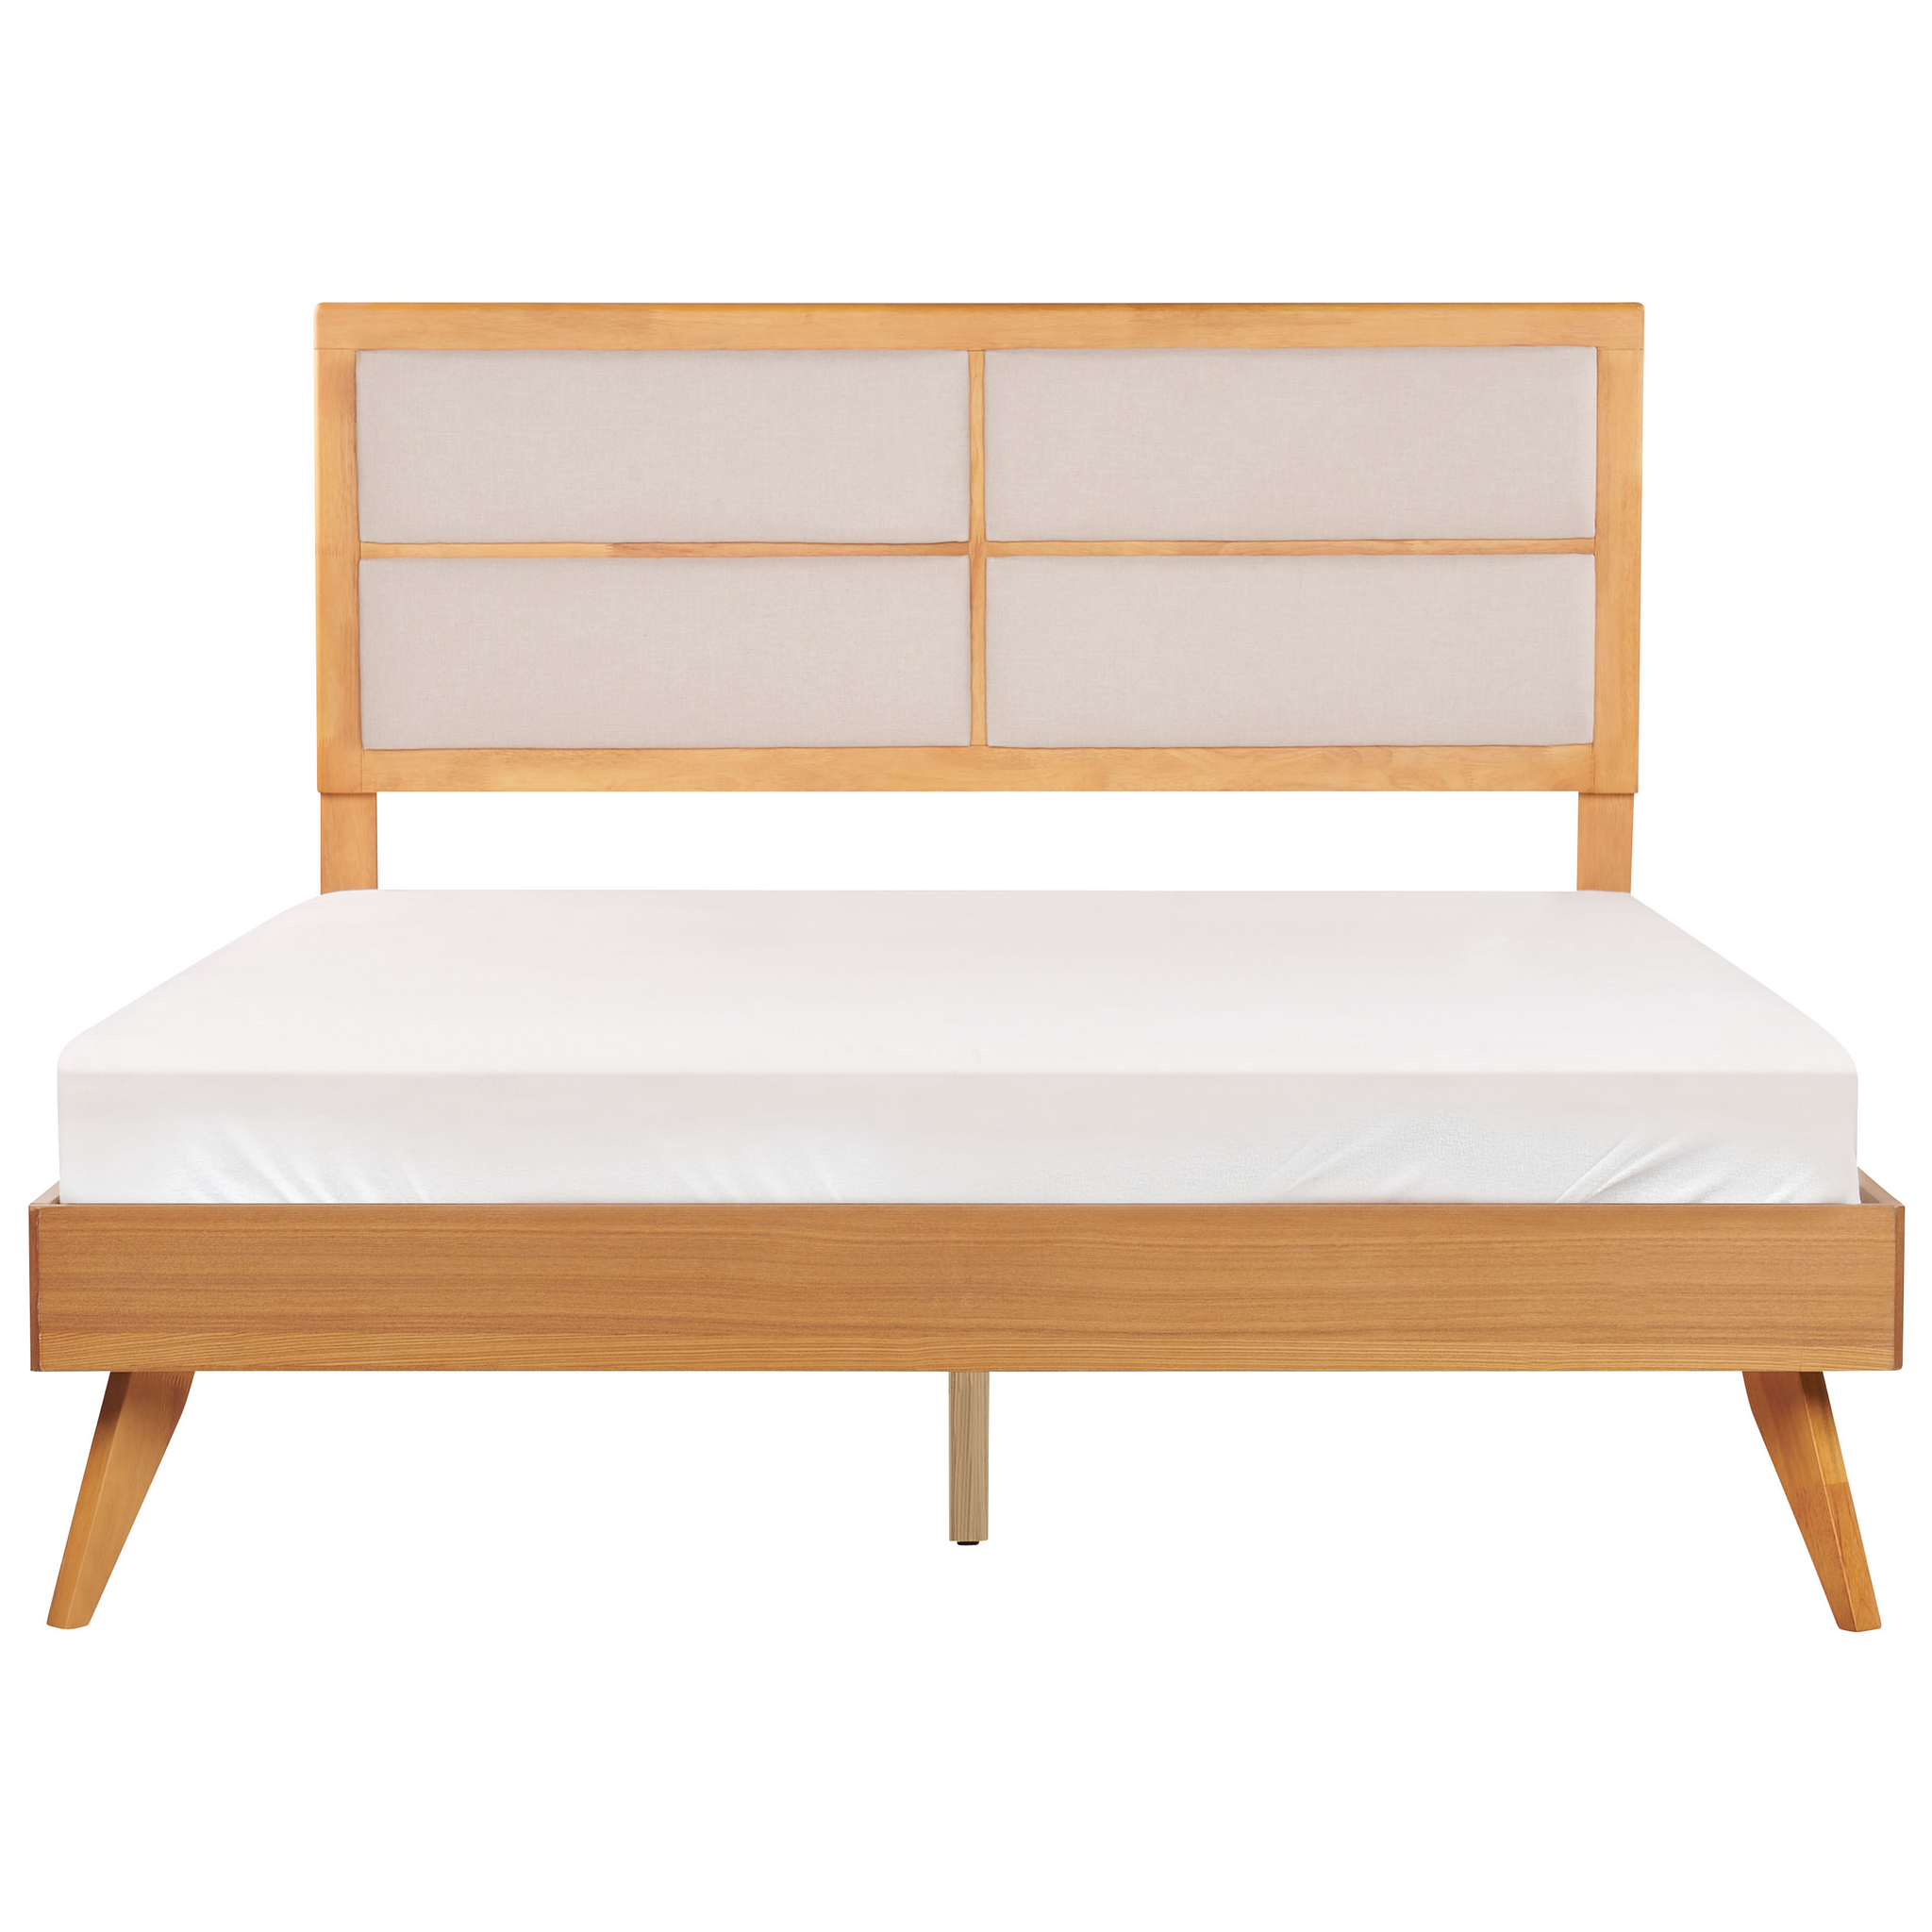 Beliani POISSY - Tweepersoonsbed - Lichthout - 160 x 200 cm - MDF